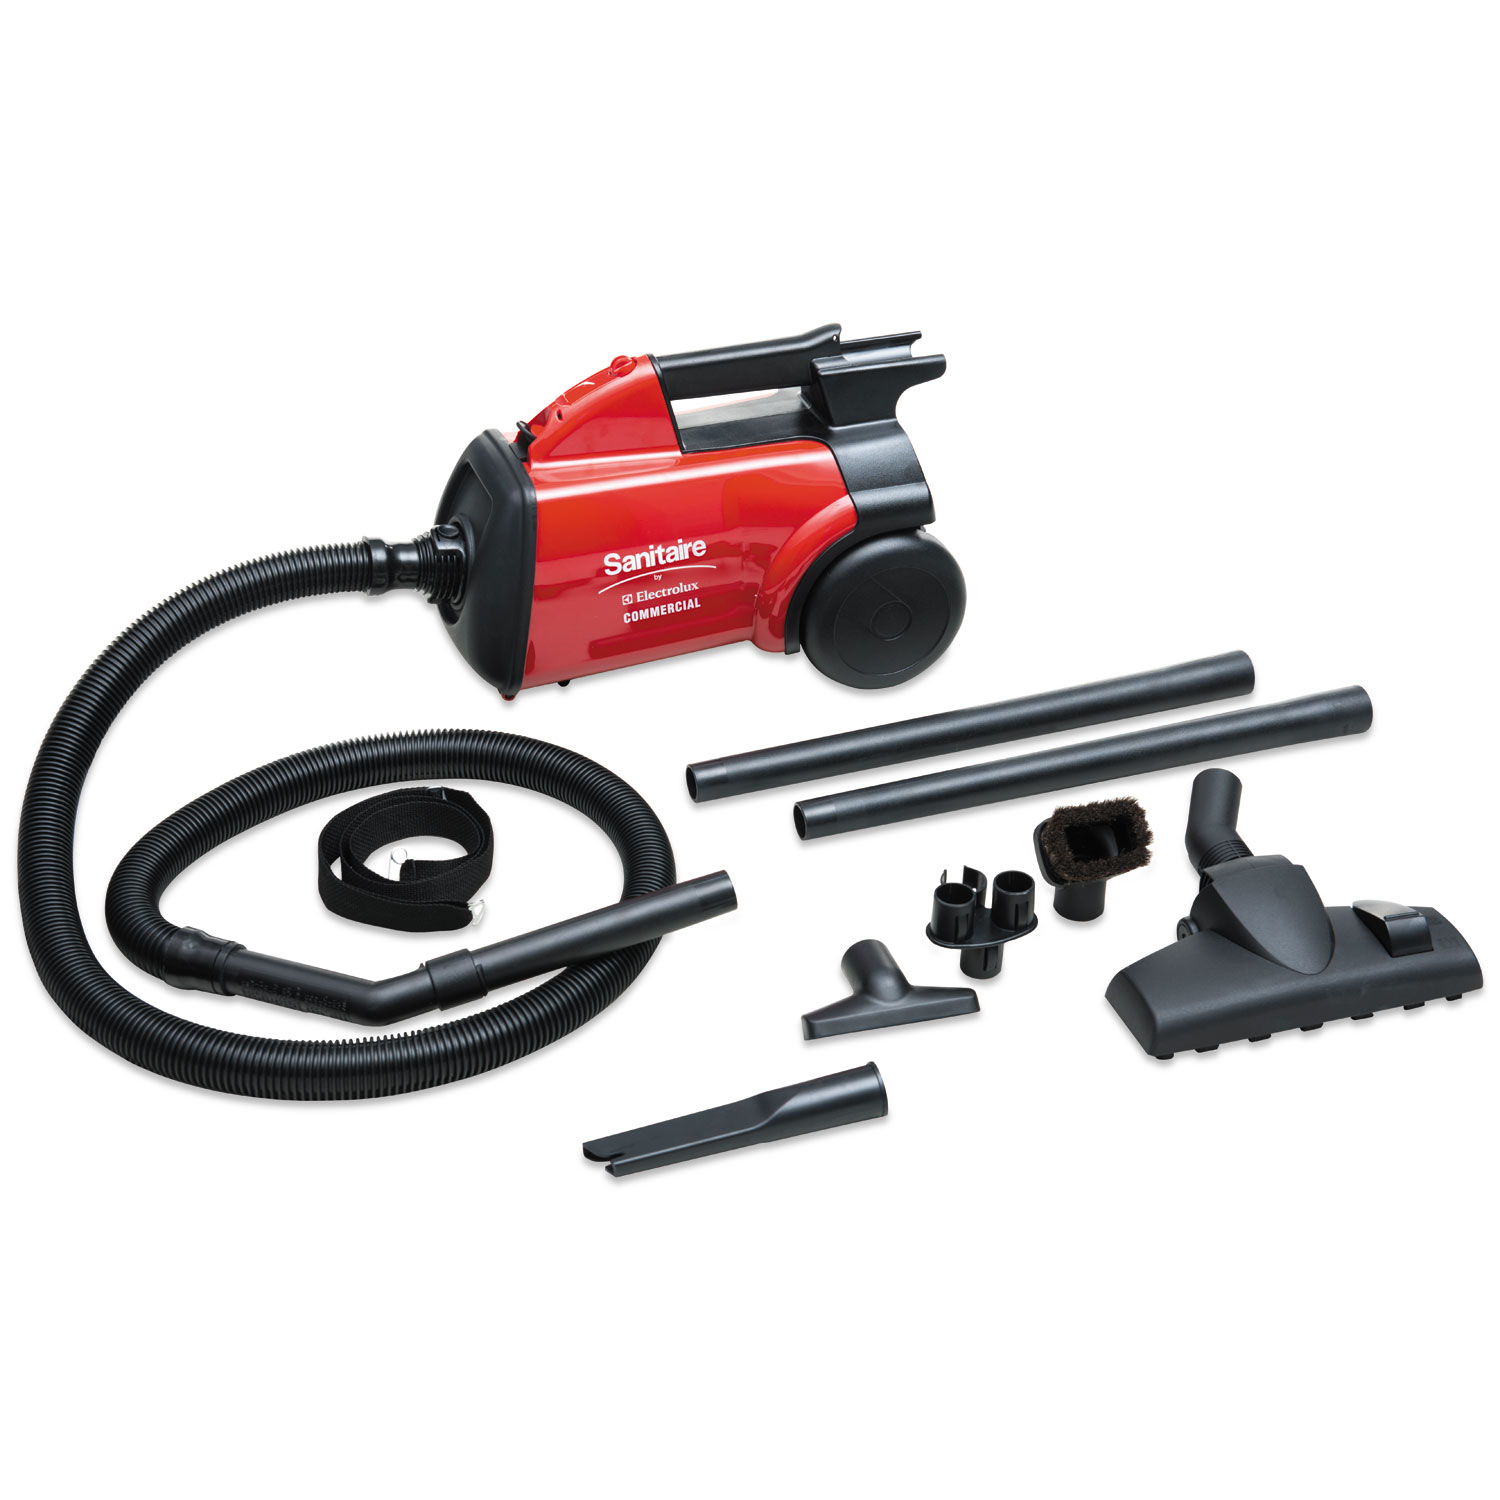  Sanitaire SC3683B EXTEND Canister Vacuum, 10 lb, Red (EURSC3683B) 